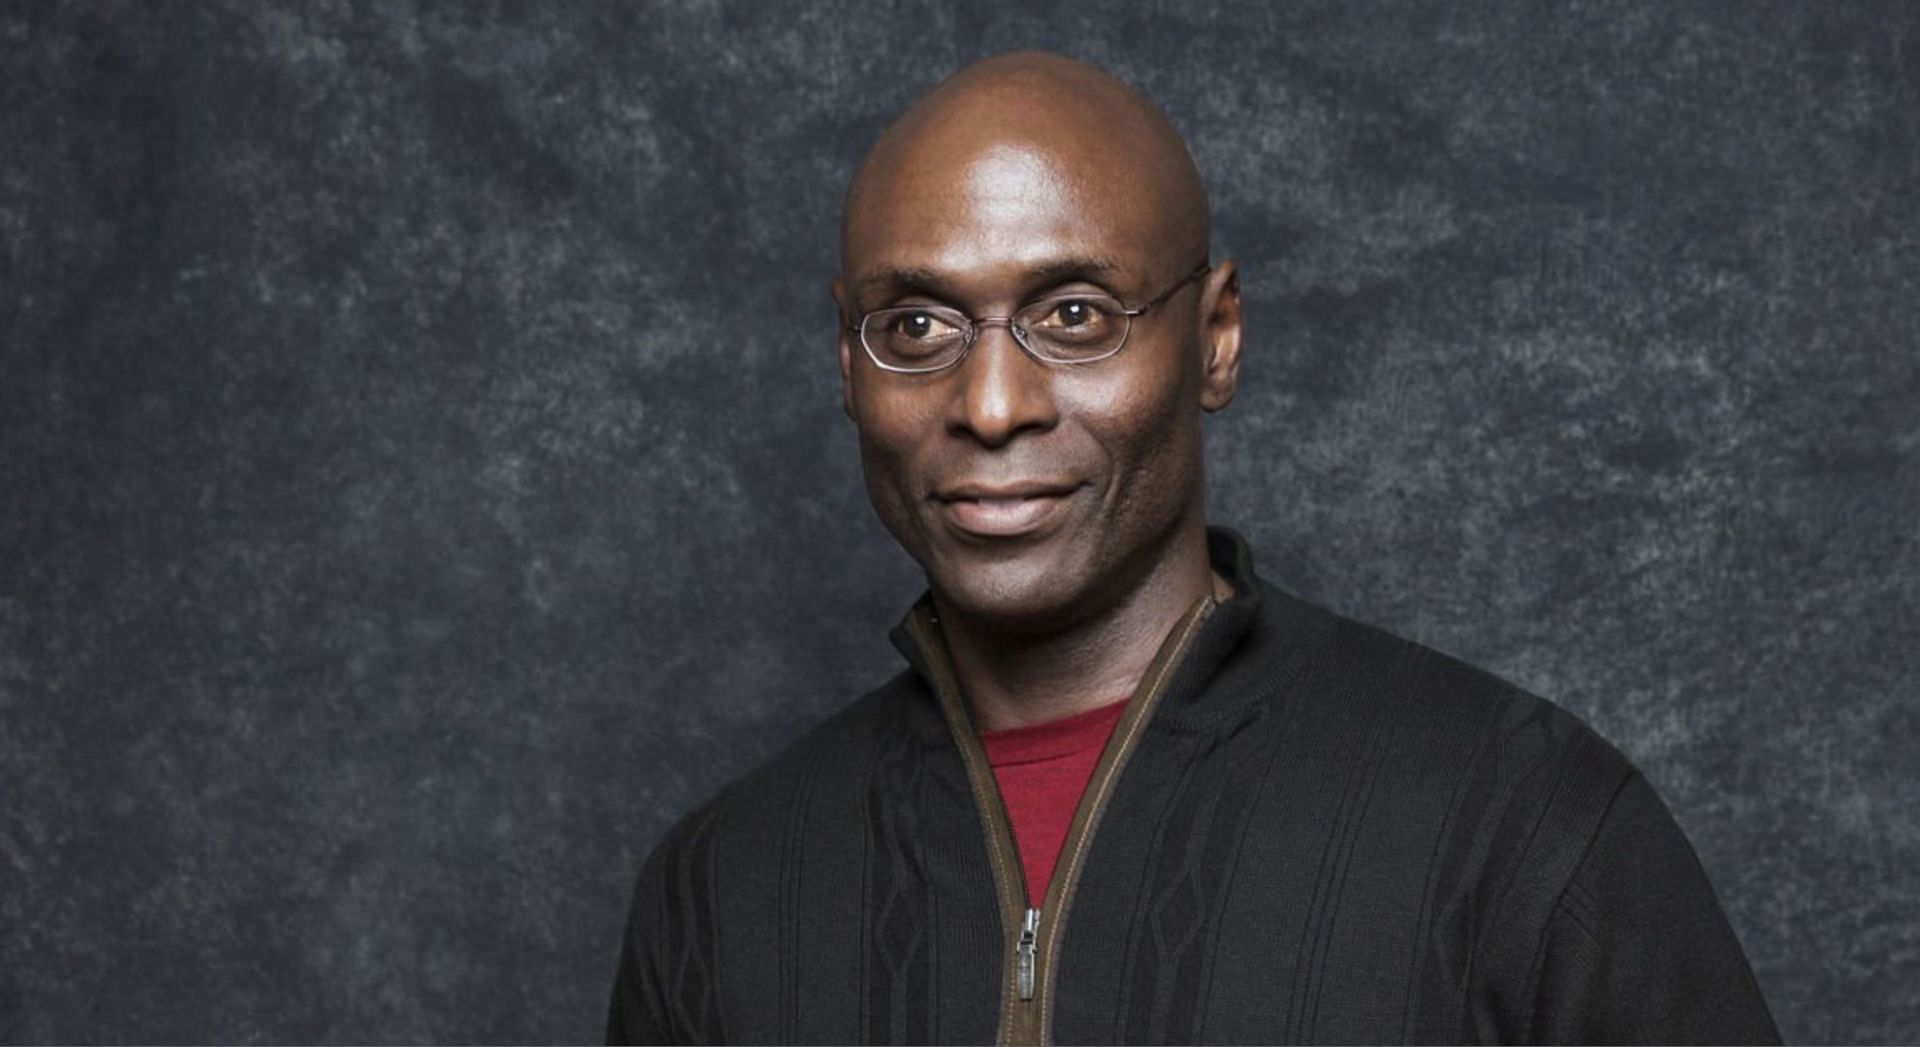 Lance Reddick's cause of death listed as heart failure, family